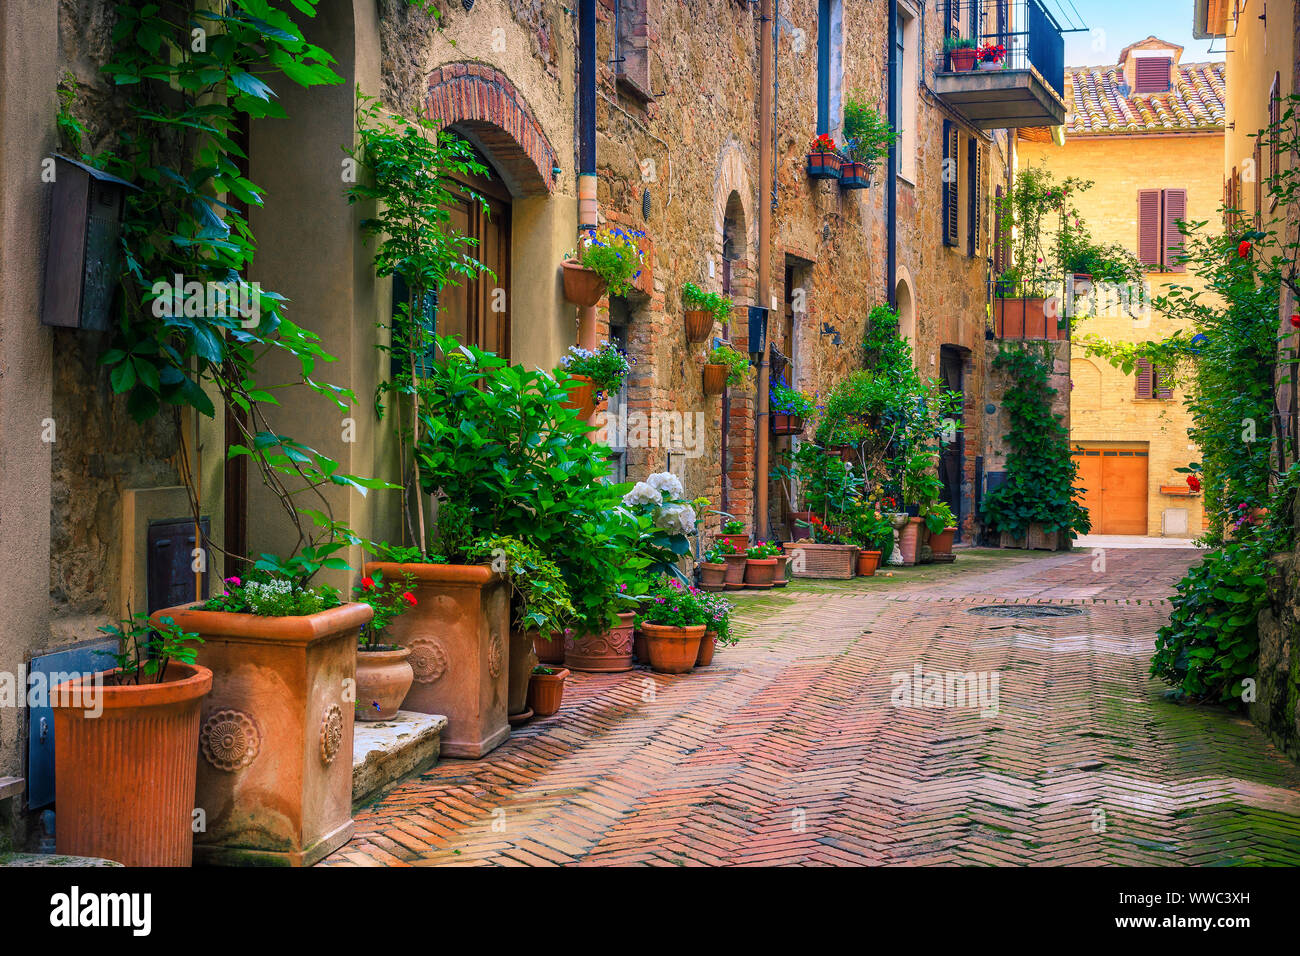 Admirable traditional Tuscany street view. Spectacular medieval stone houses and narrow cute paved street with flowery entrances, Pienza, Tuscany, Ita Stock Photo